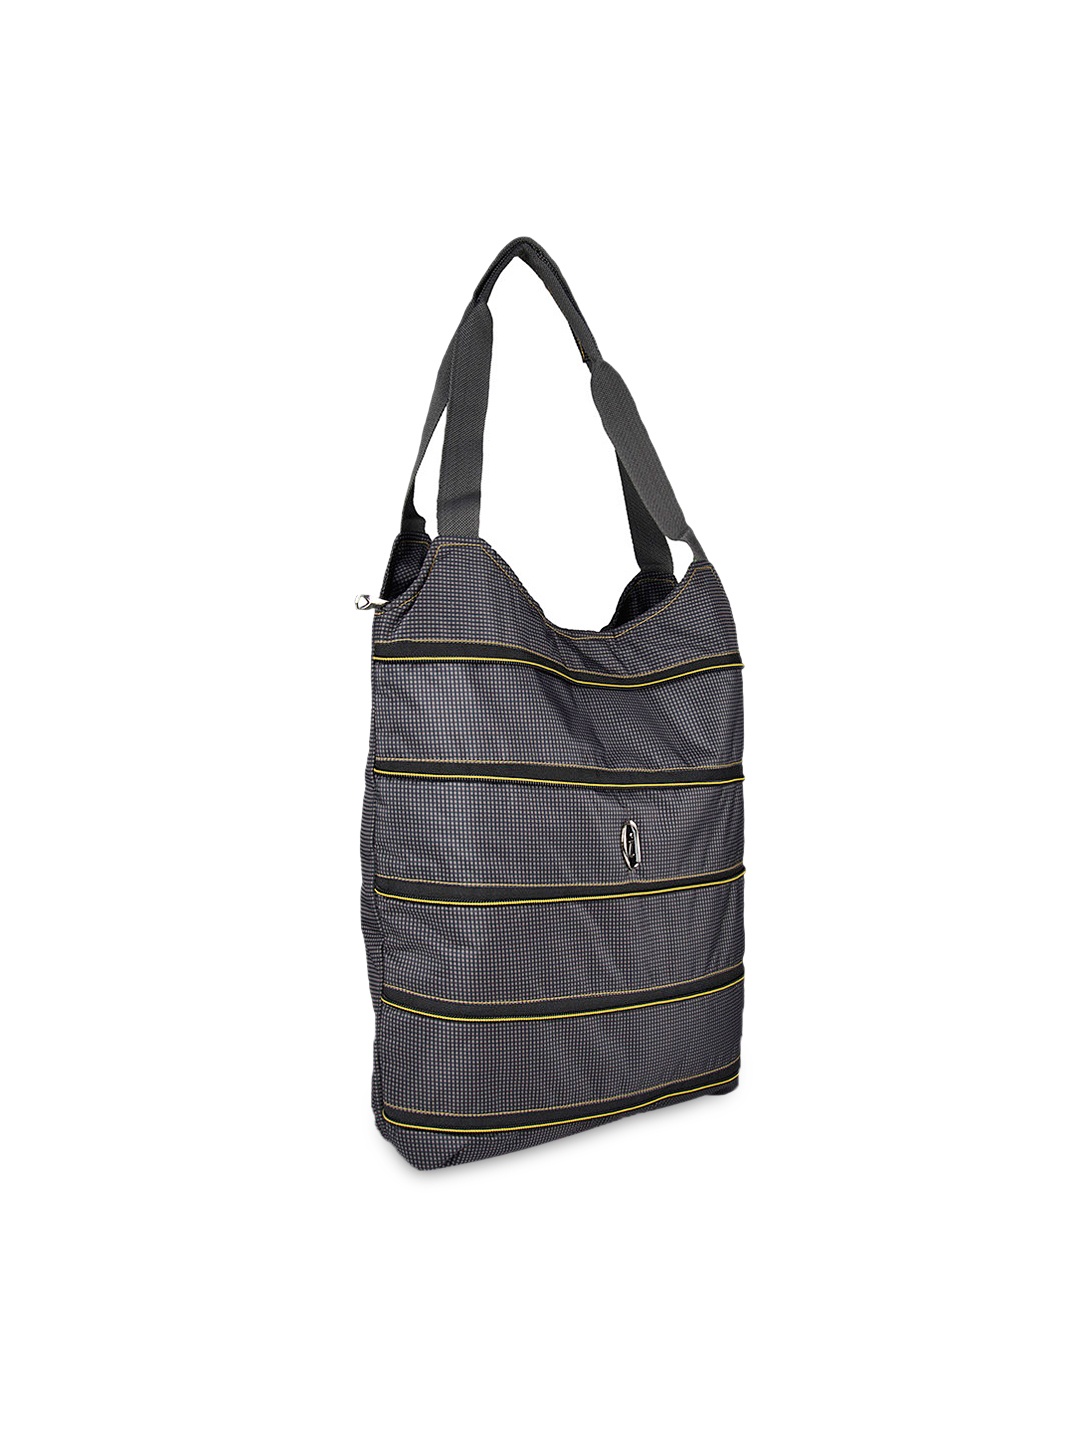 Myntra Carry On Grey Tote Bag 496188 | Buy Myntra Carry On Tote Bags at best price online. All ...